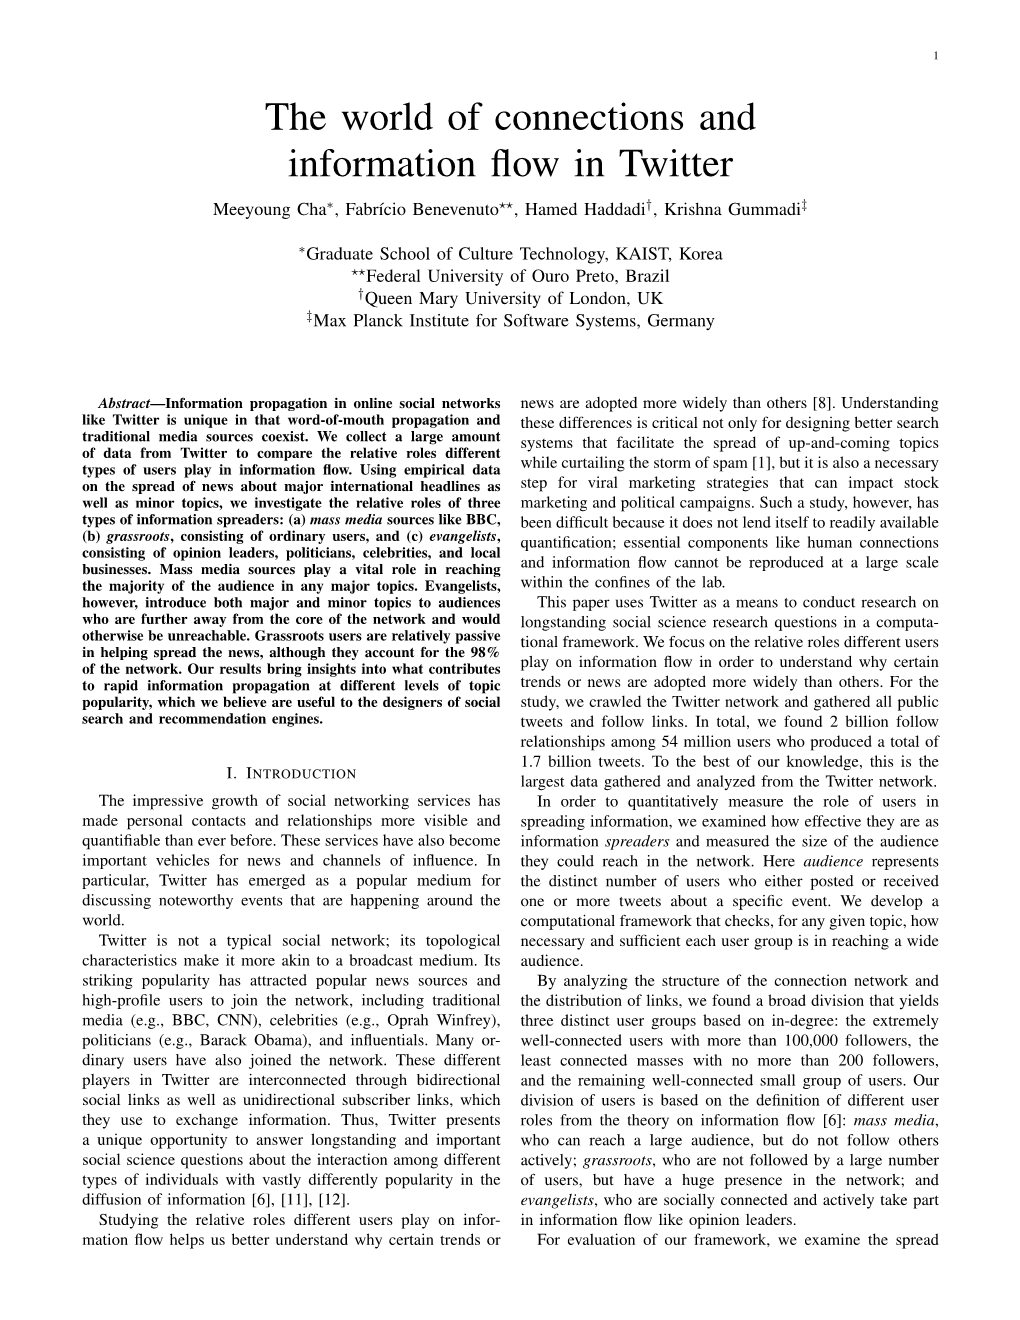 The World of Connections and Information Flow in Twitter